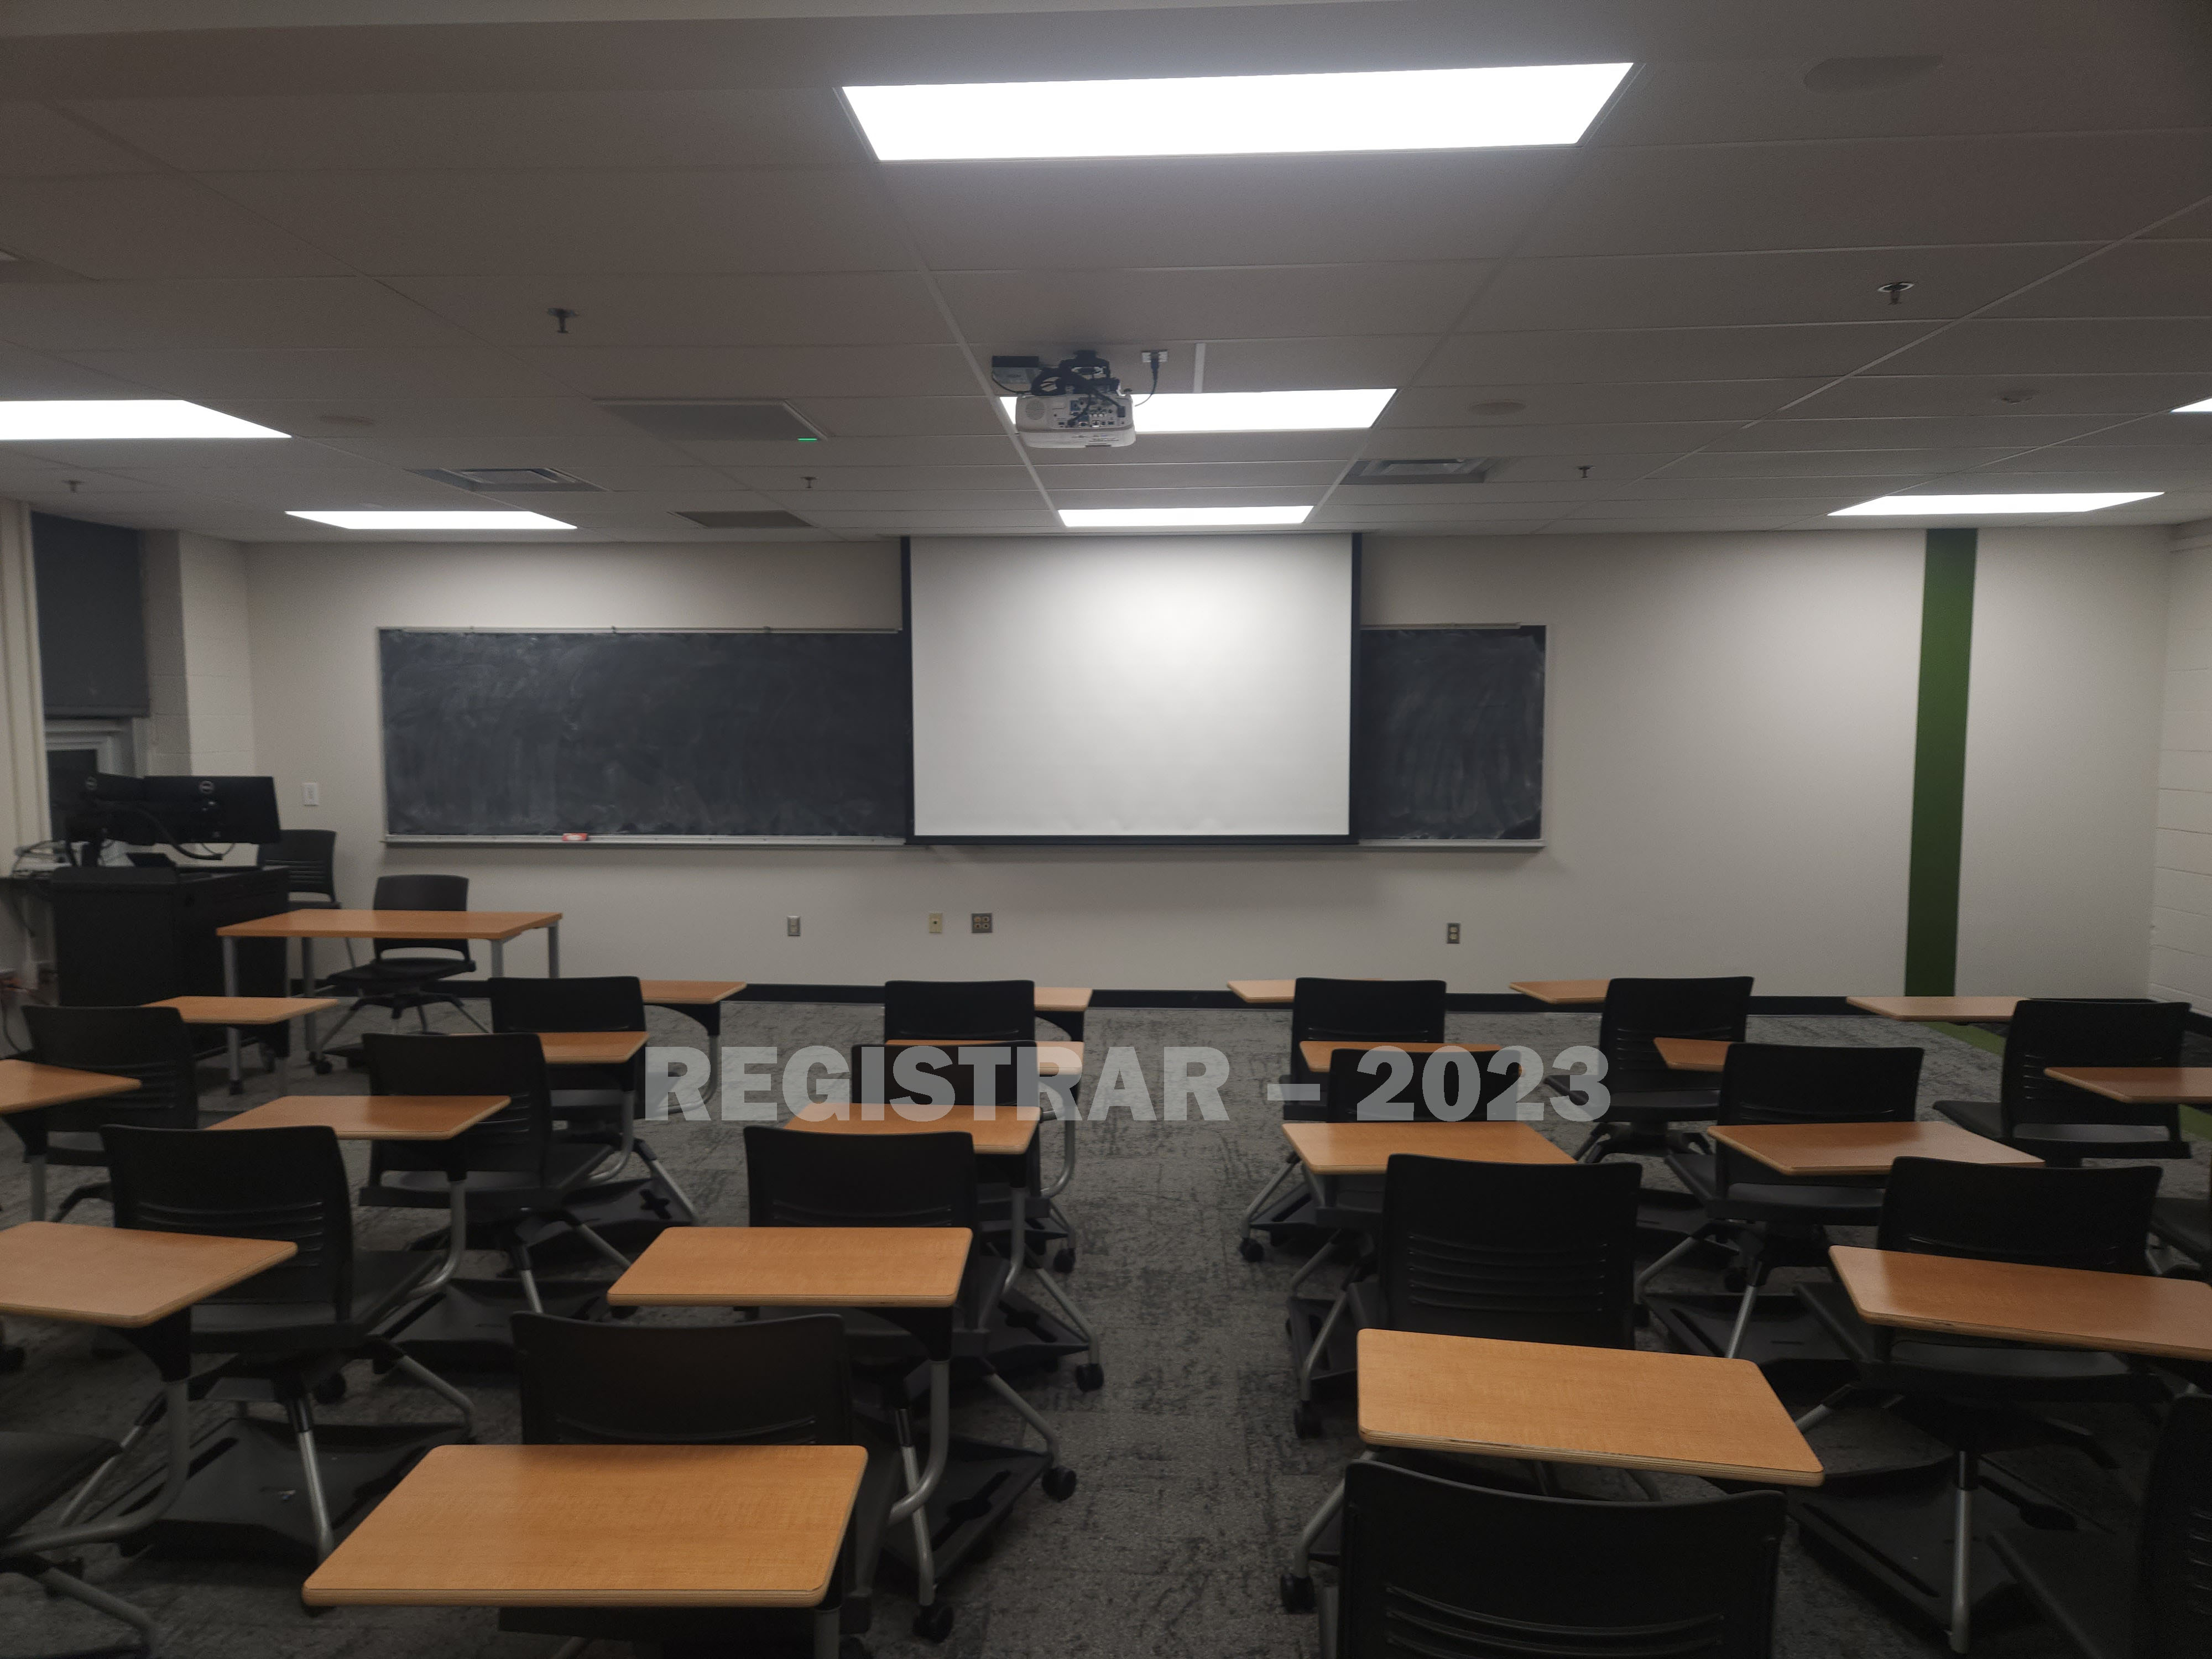 Hopkins Hall room 246 view from the back of the room with projector screen down